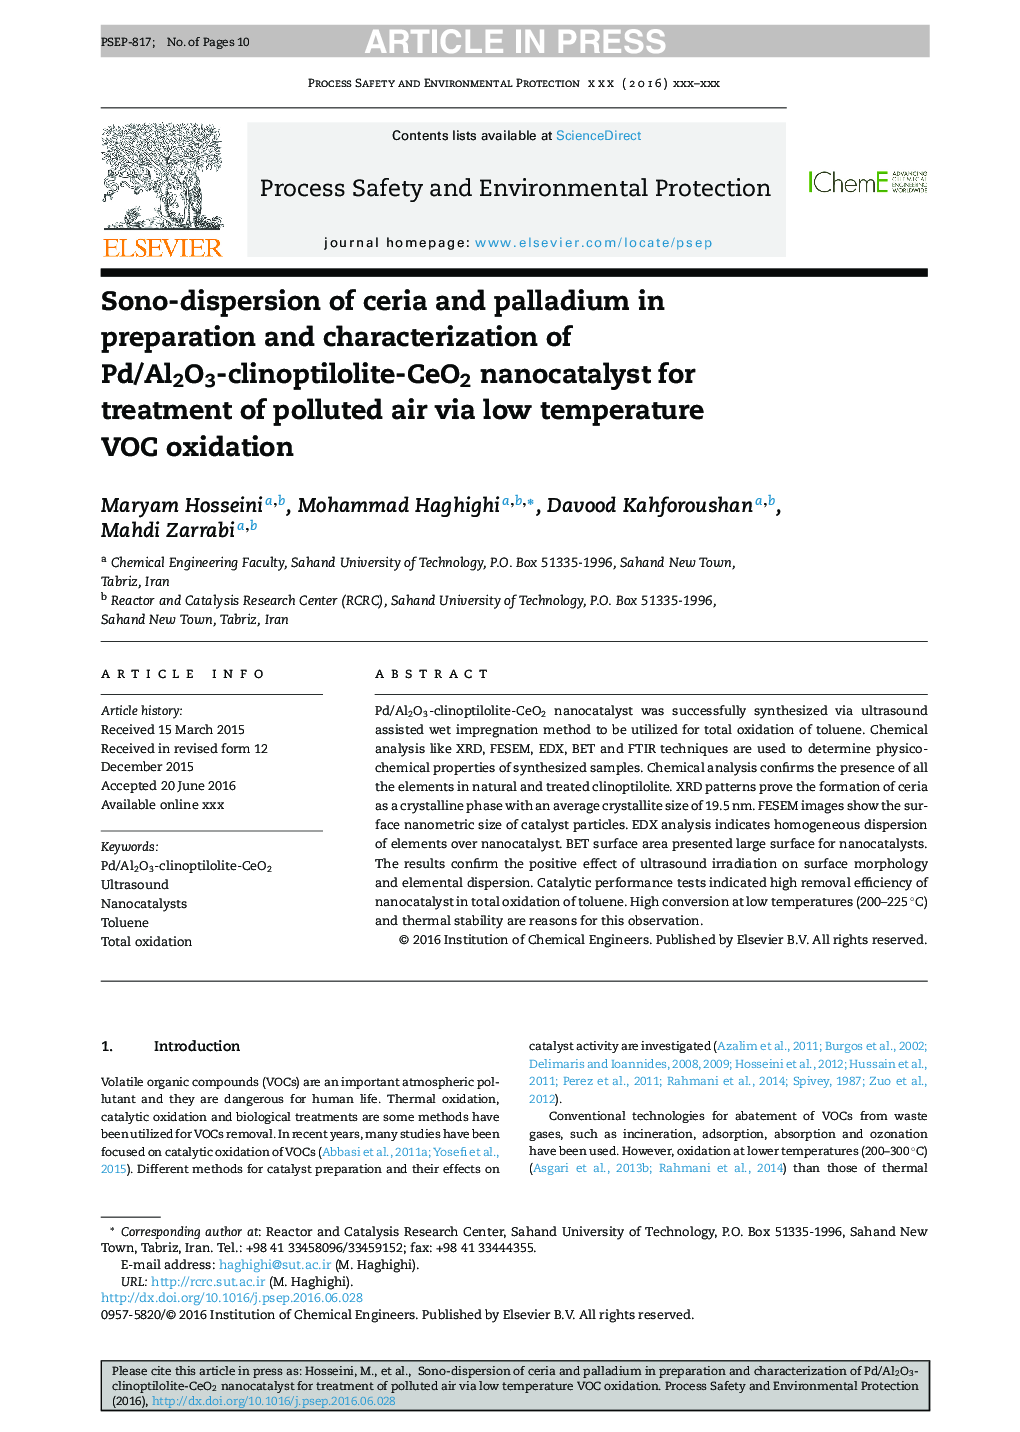 Sono-dispersion of ceria and palladium in preparation and characterization of Pd/Al2O3-clinoptilolite-CeO2 nanocatalyst for treatment of polluted air via low temperature VOC oxidation